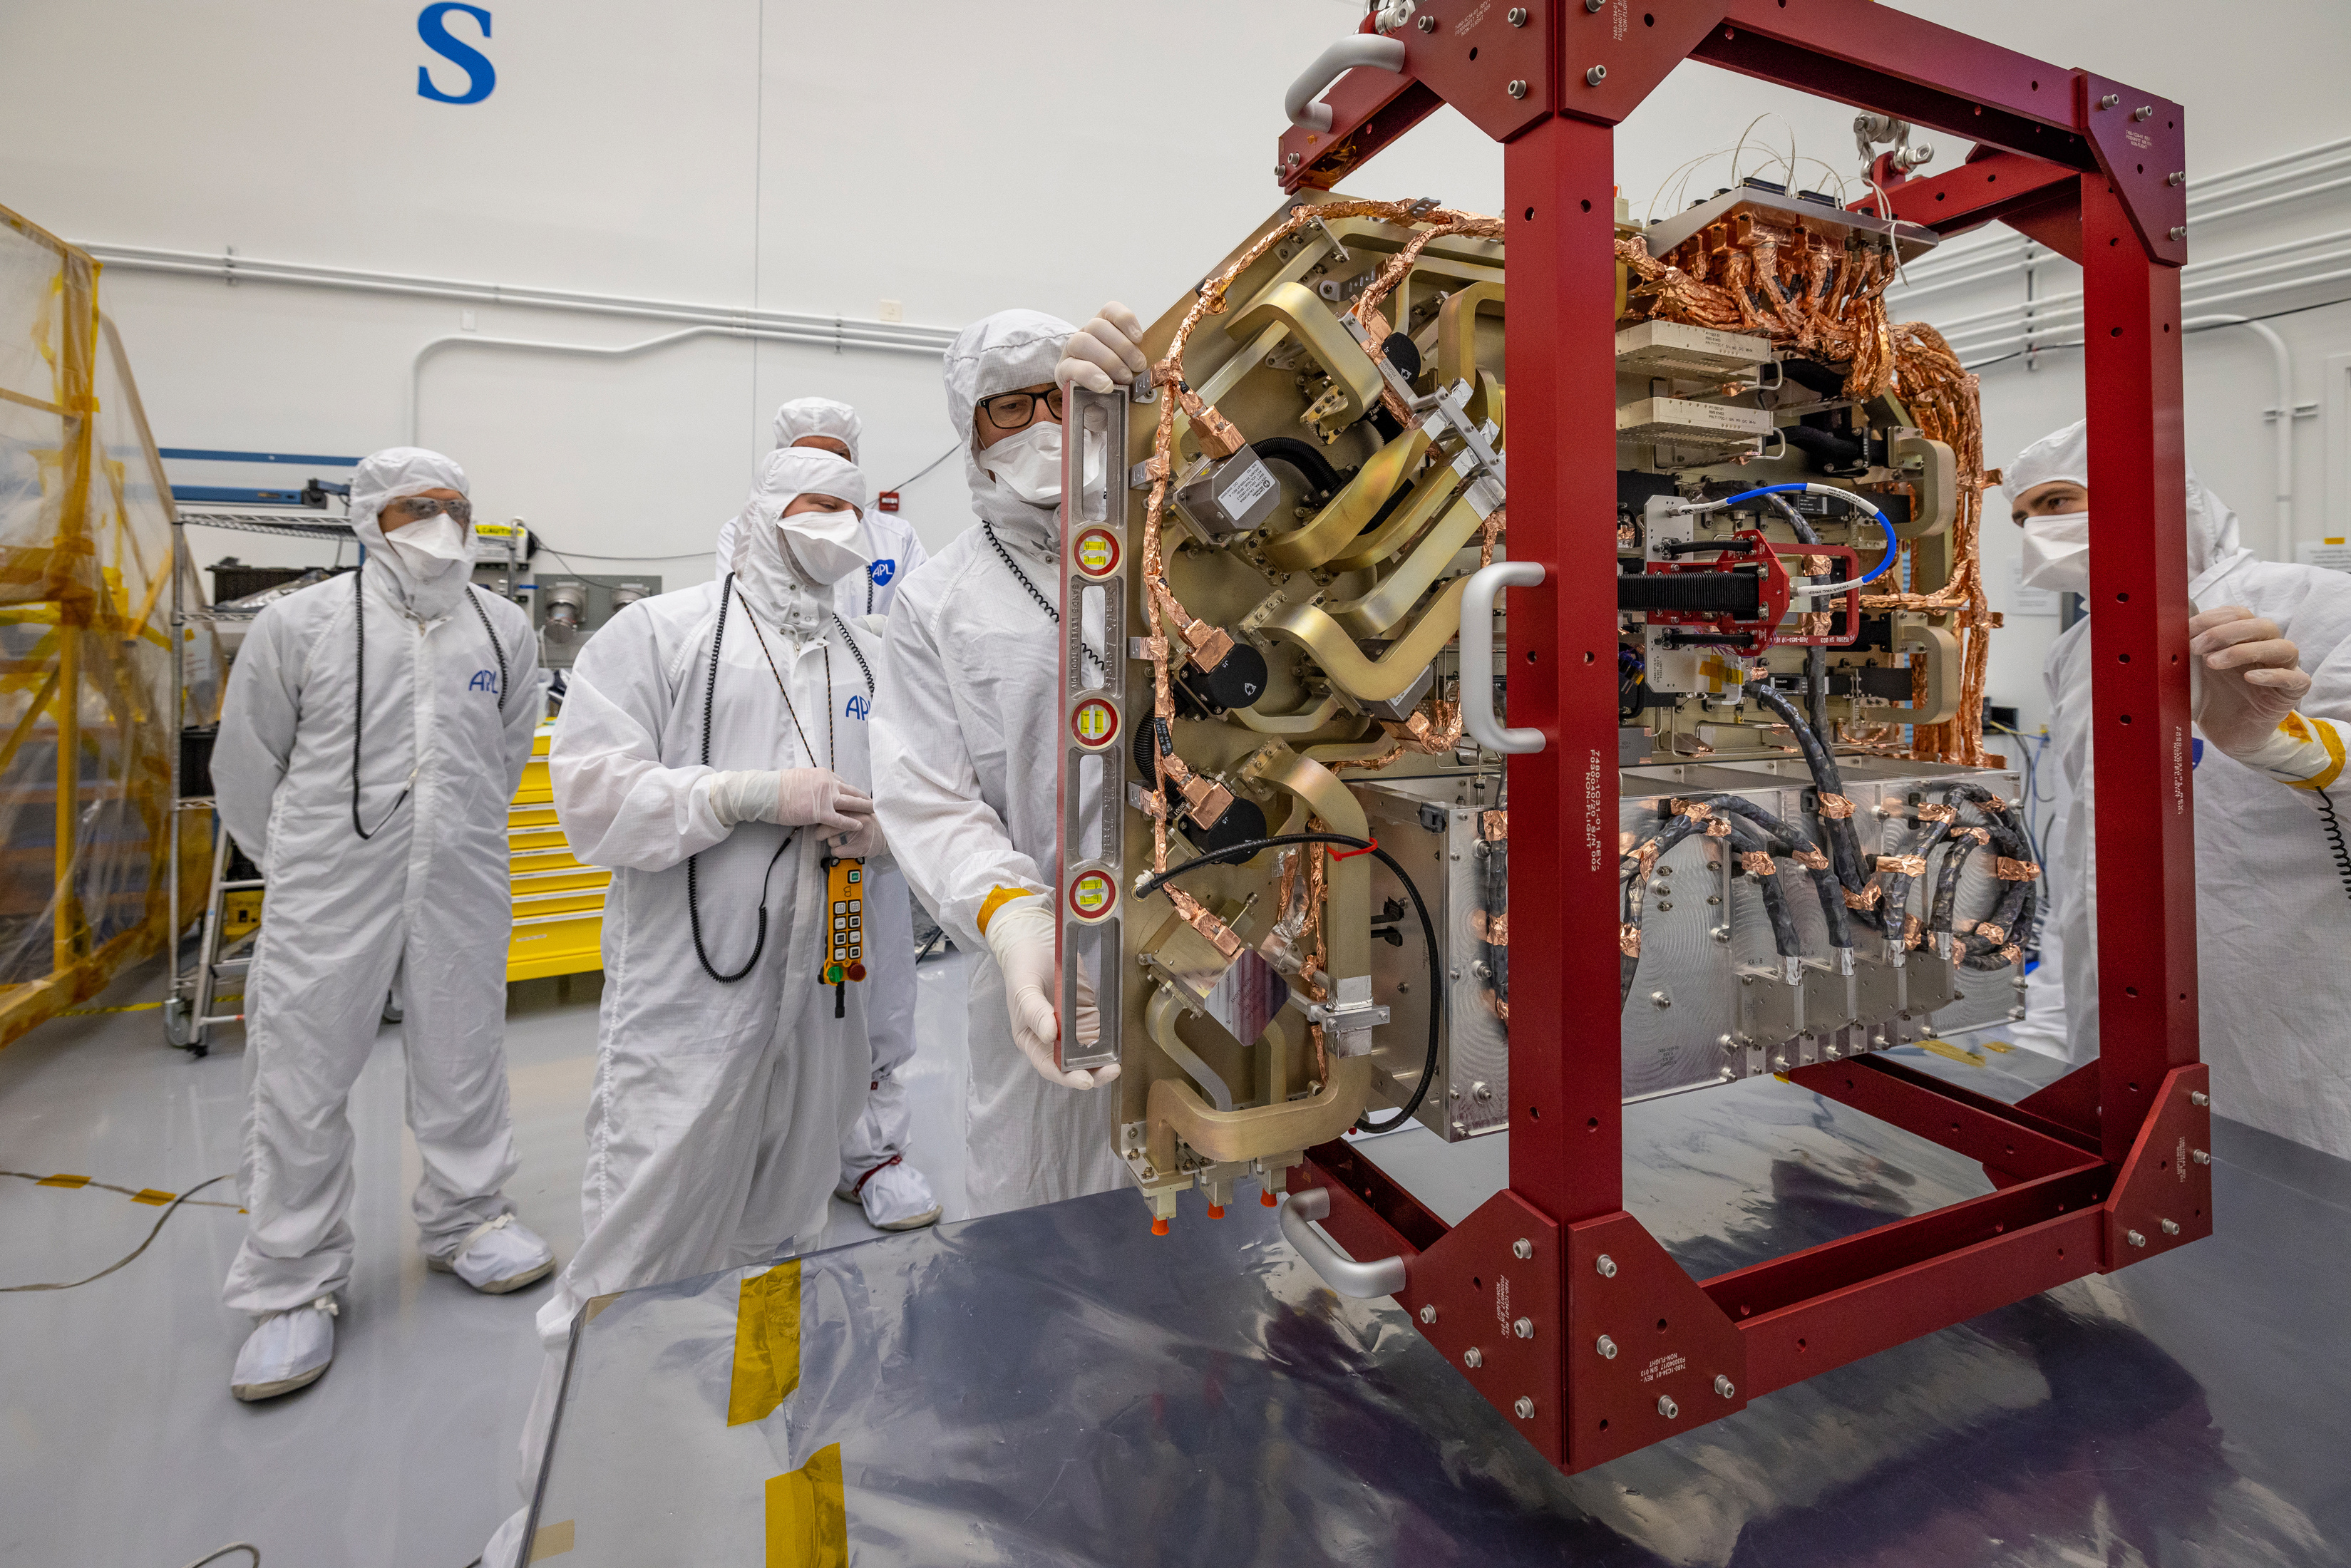 Europa Clipper’s radio frequency (RF) panel being prepped before mounting it onto the propulsion module.